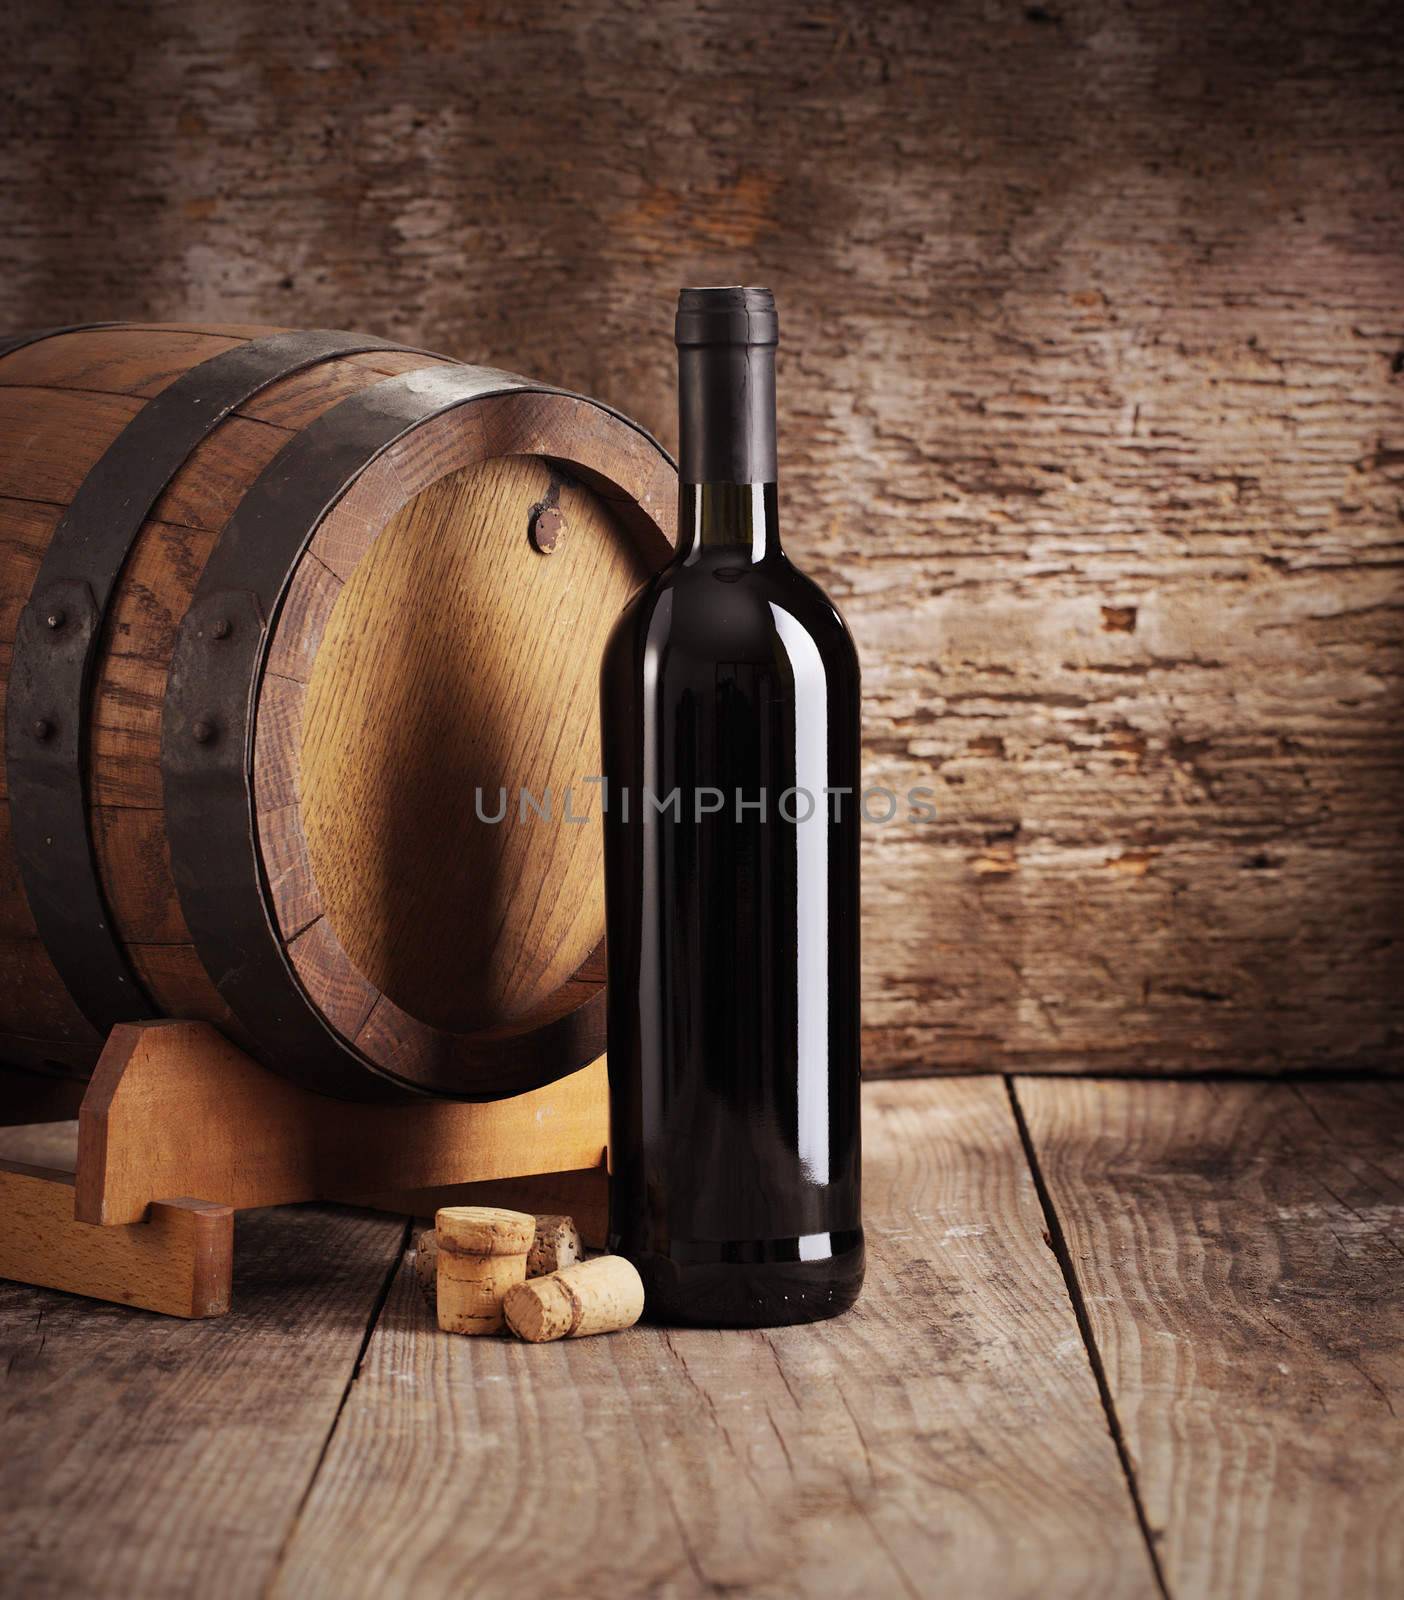 Red wine bottle with barrel and corks